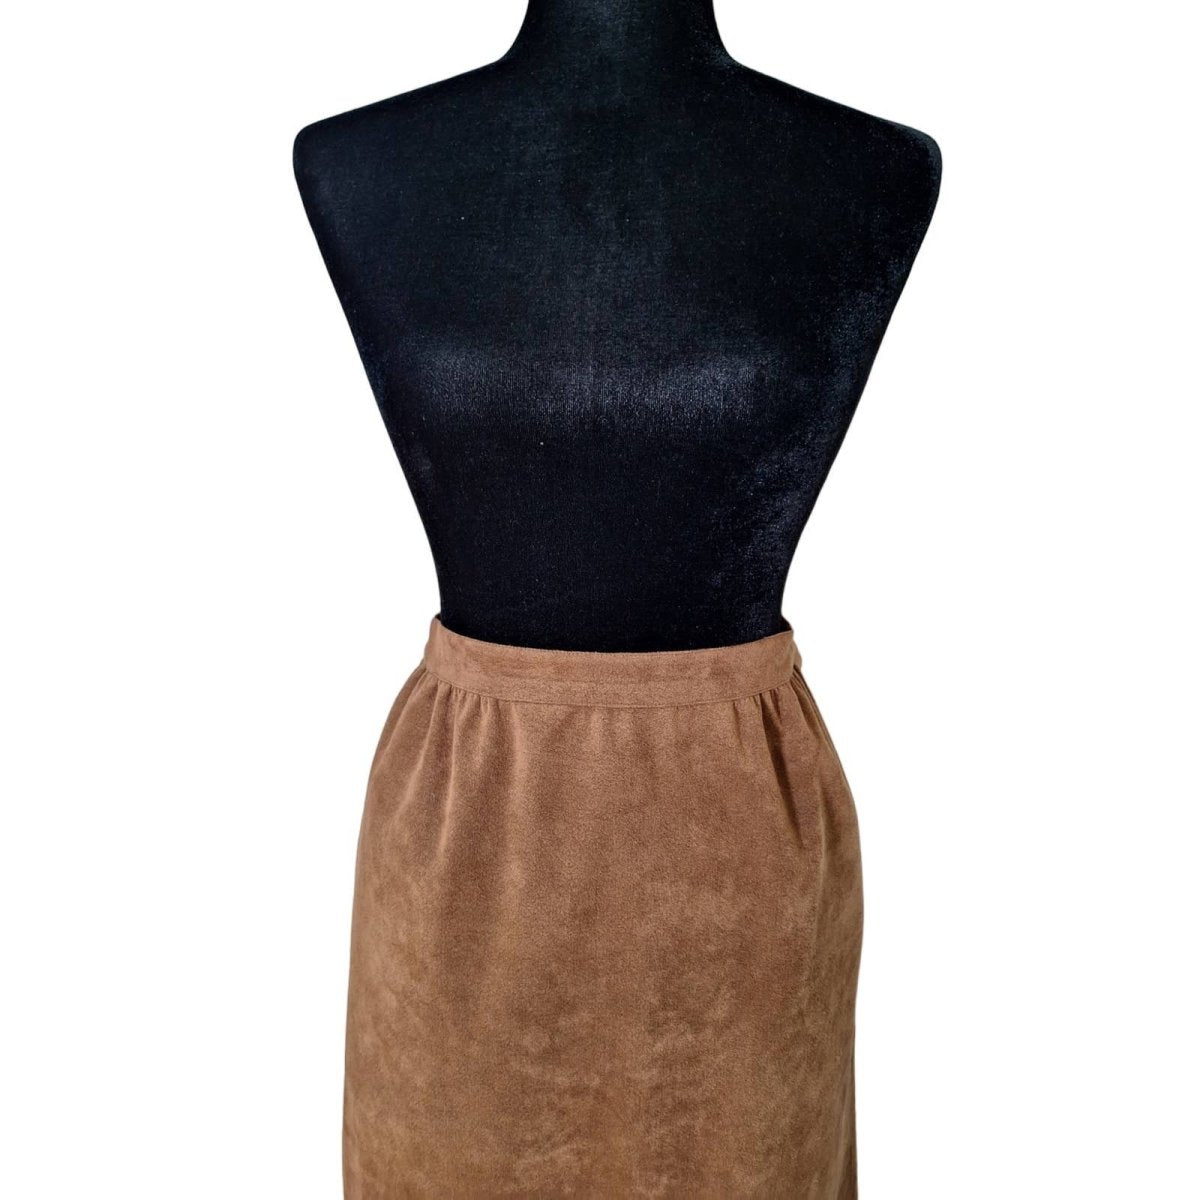 70s Brown Faux Suede Midi Skirt Size Medium Waist 27" to 31" - themallvintage The Mall Vintage